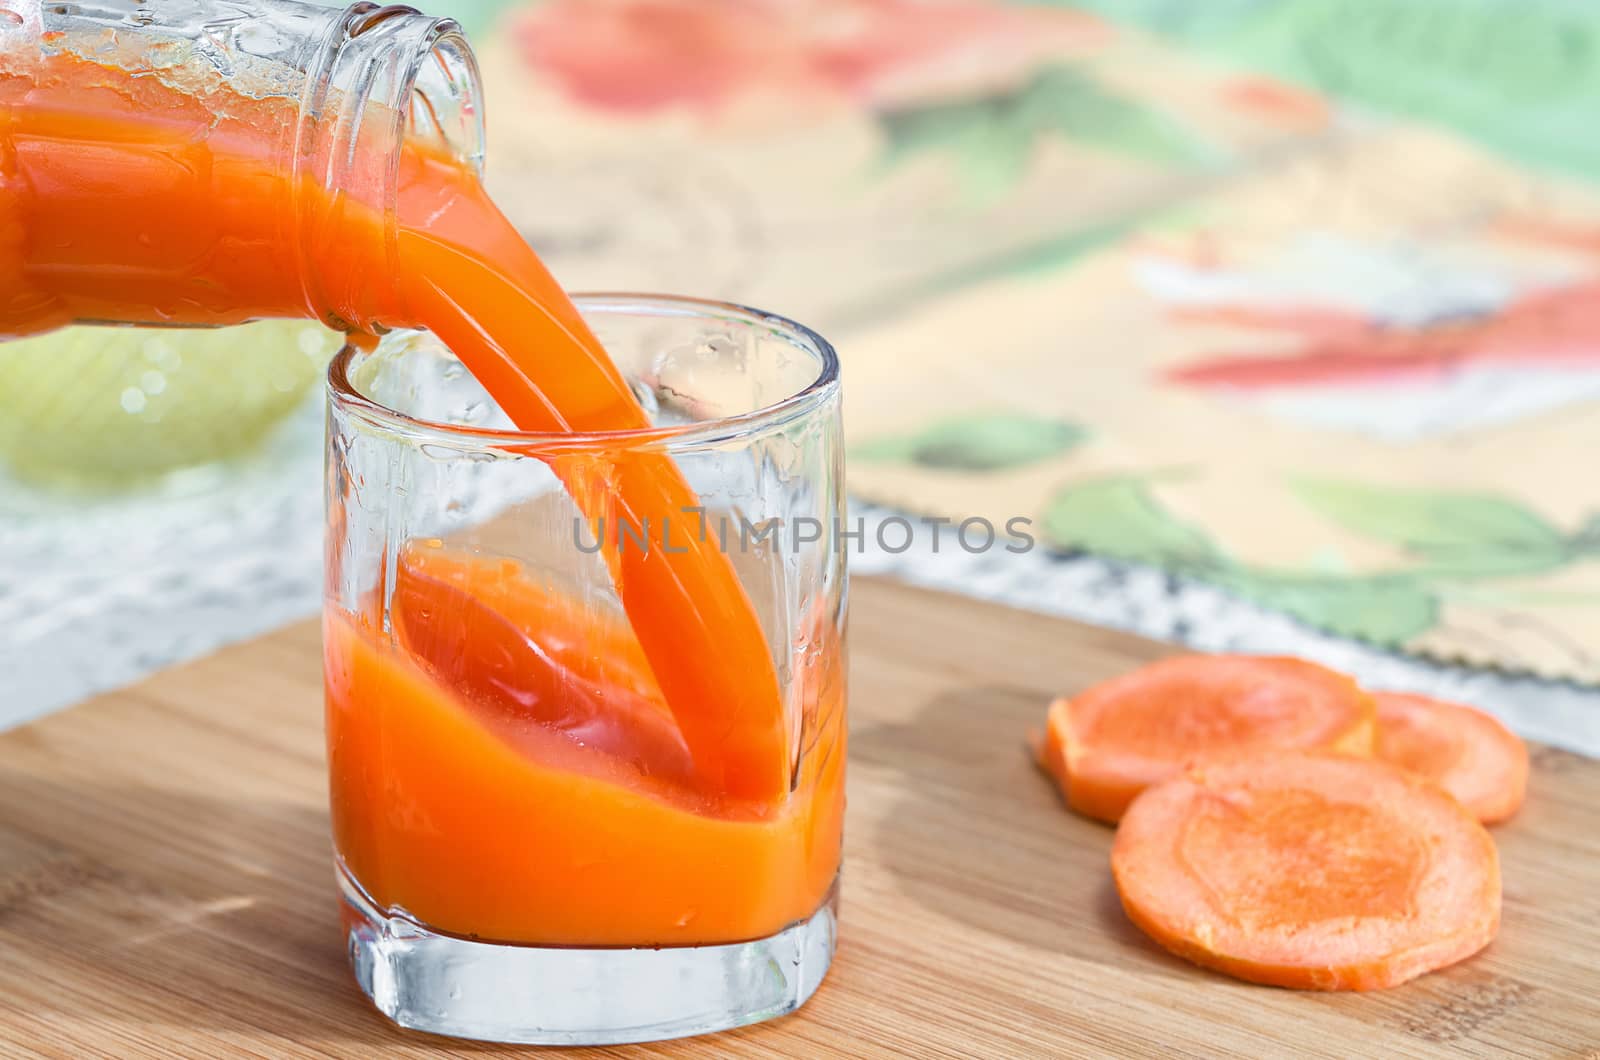 Fresh carrot juice is poured from a bottle into a glass, which stands on the table. Selective focus.